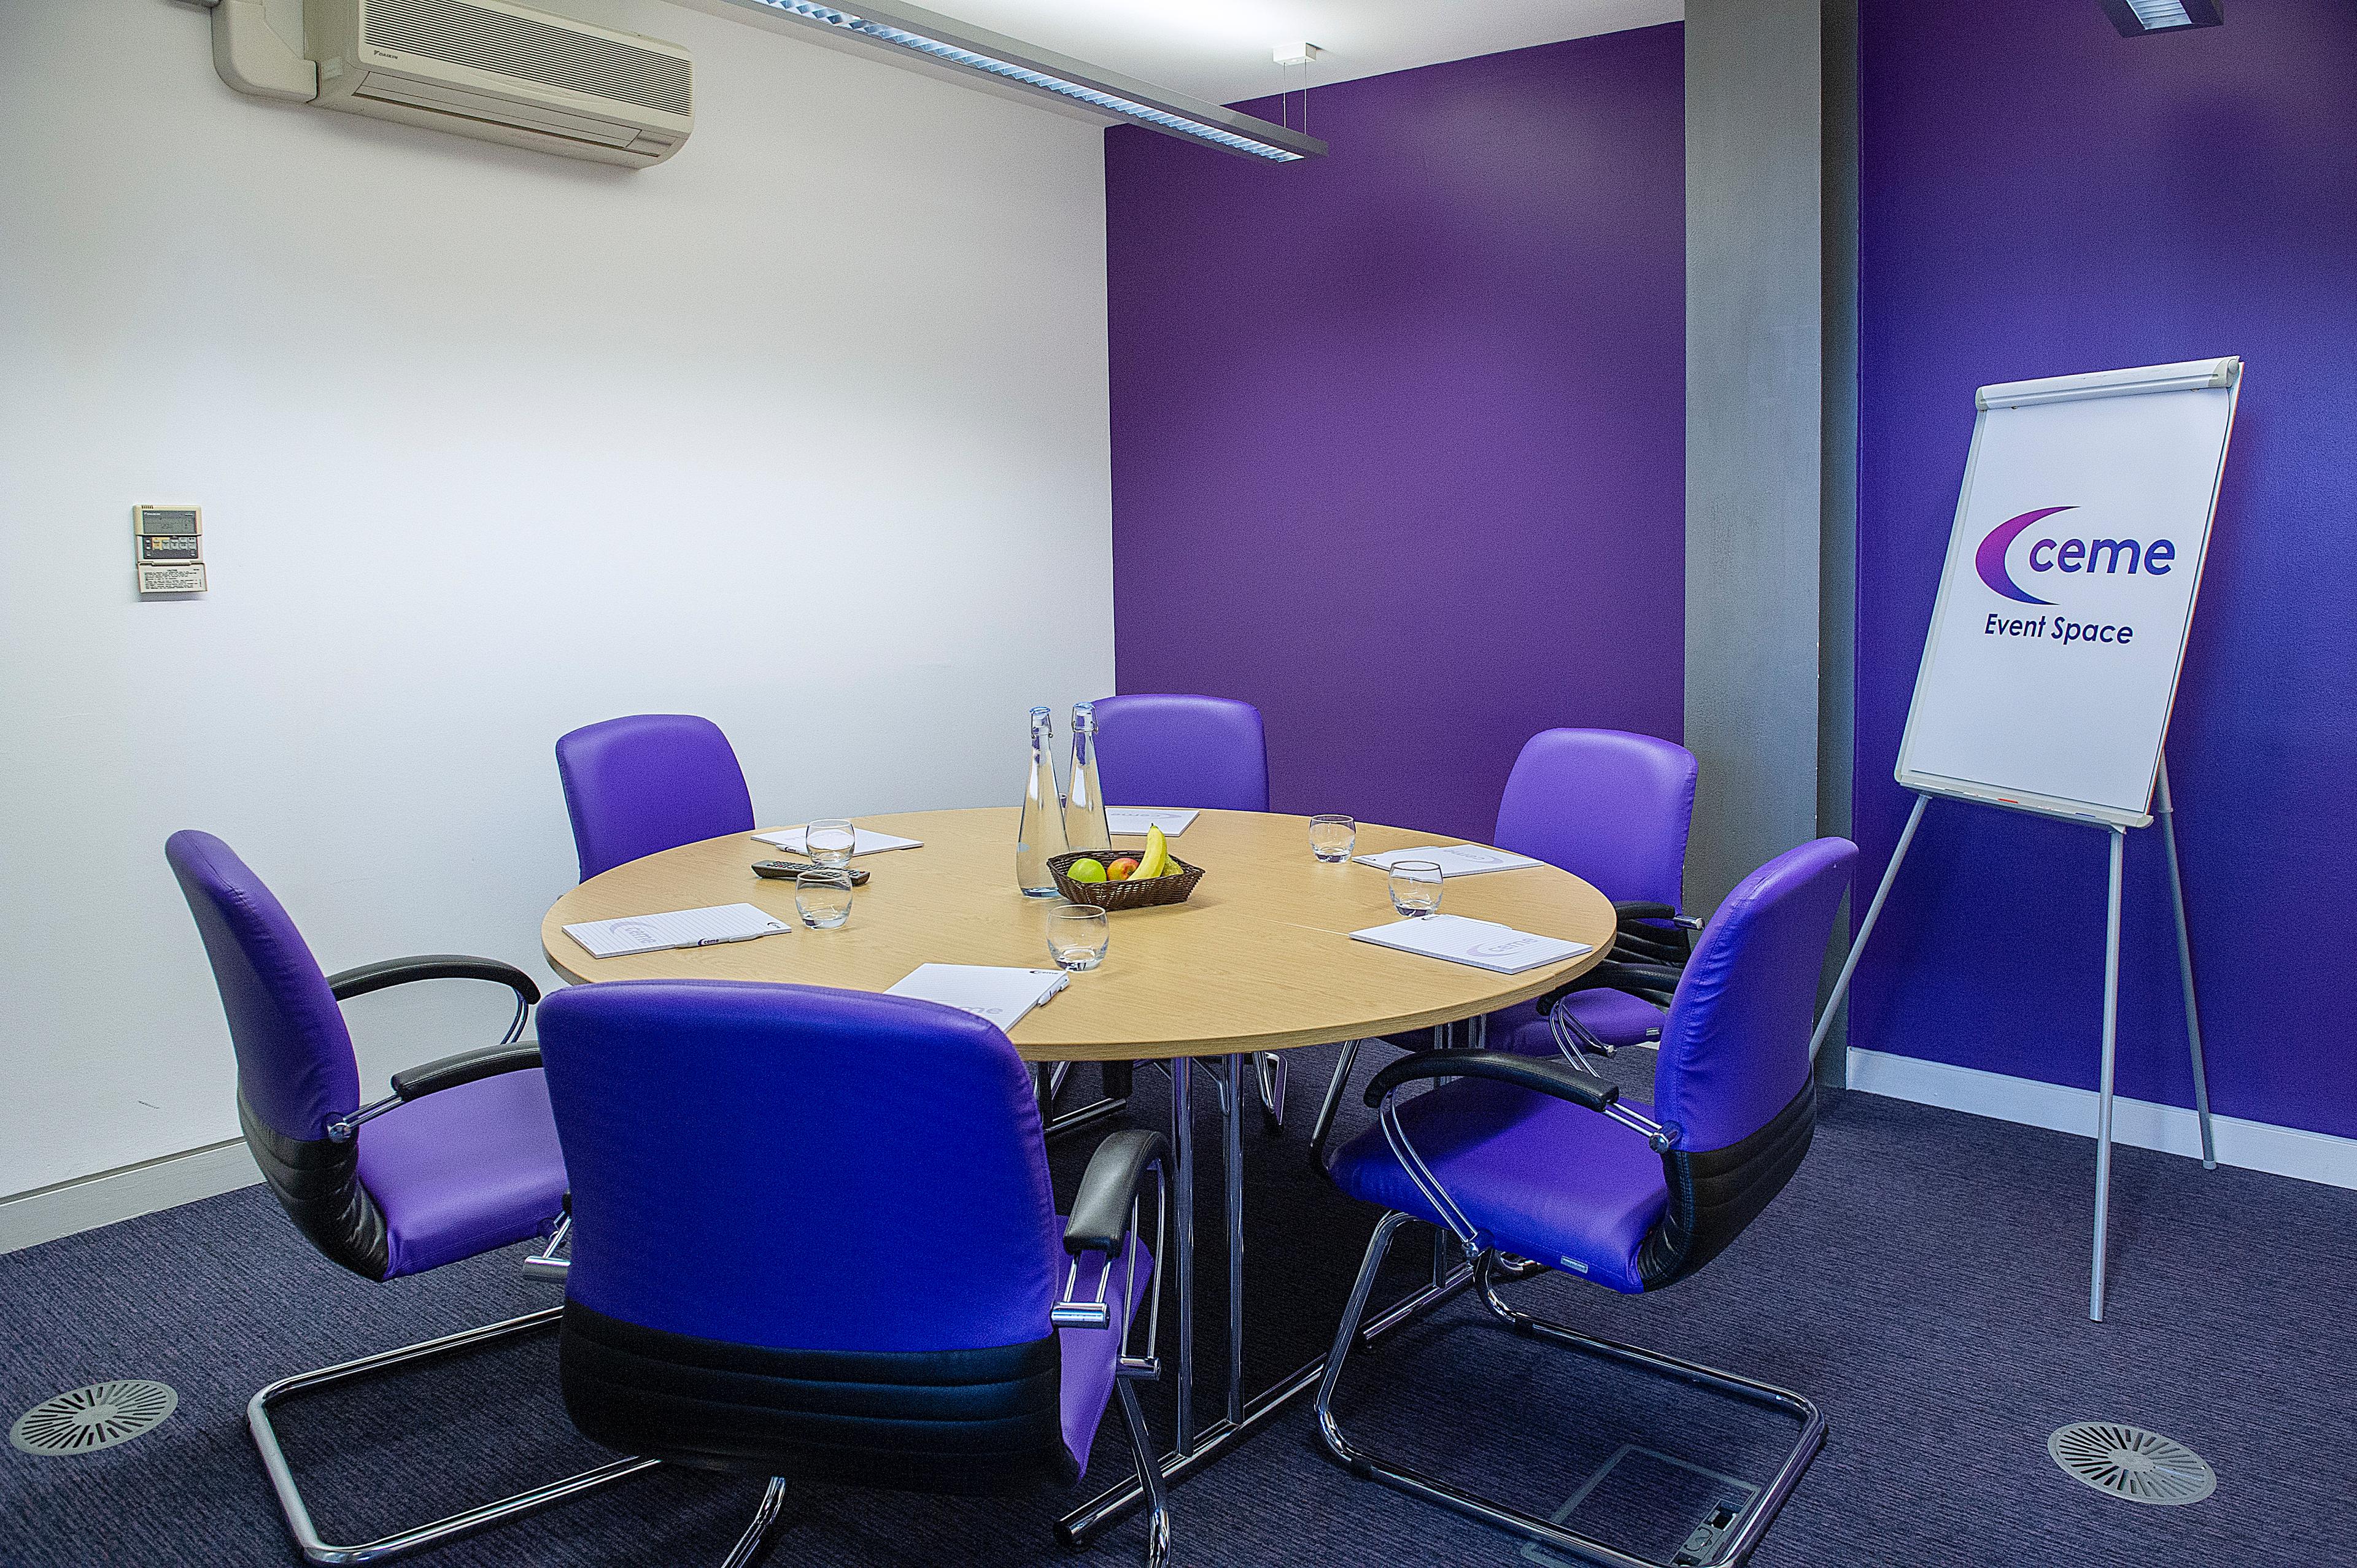 Small Meeting Room, Event Space CEME photo #1